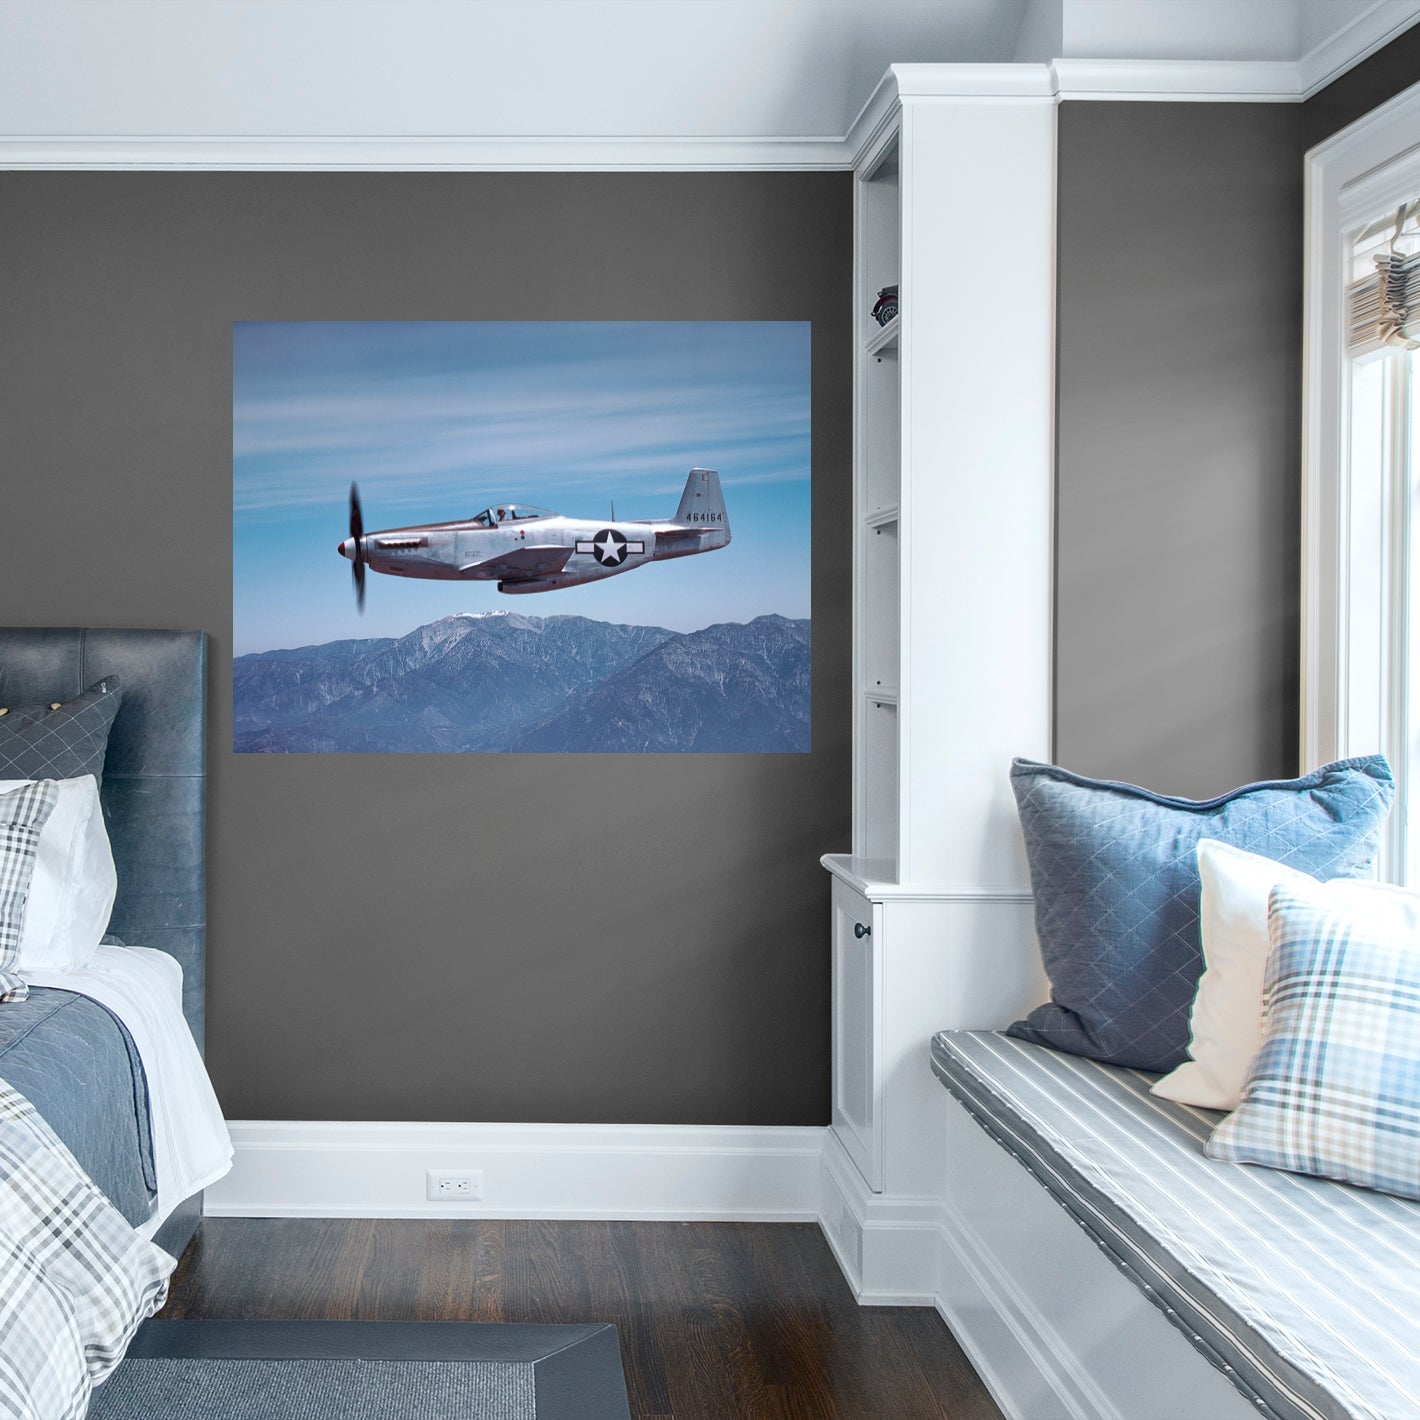 Boeing: Boeing 84-171c Poster - Officially Licensed Boeing Removable Adhesive Decal